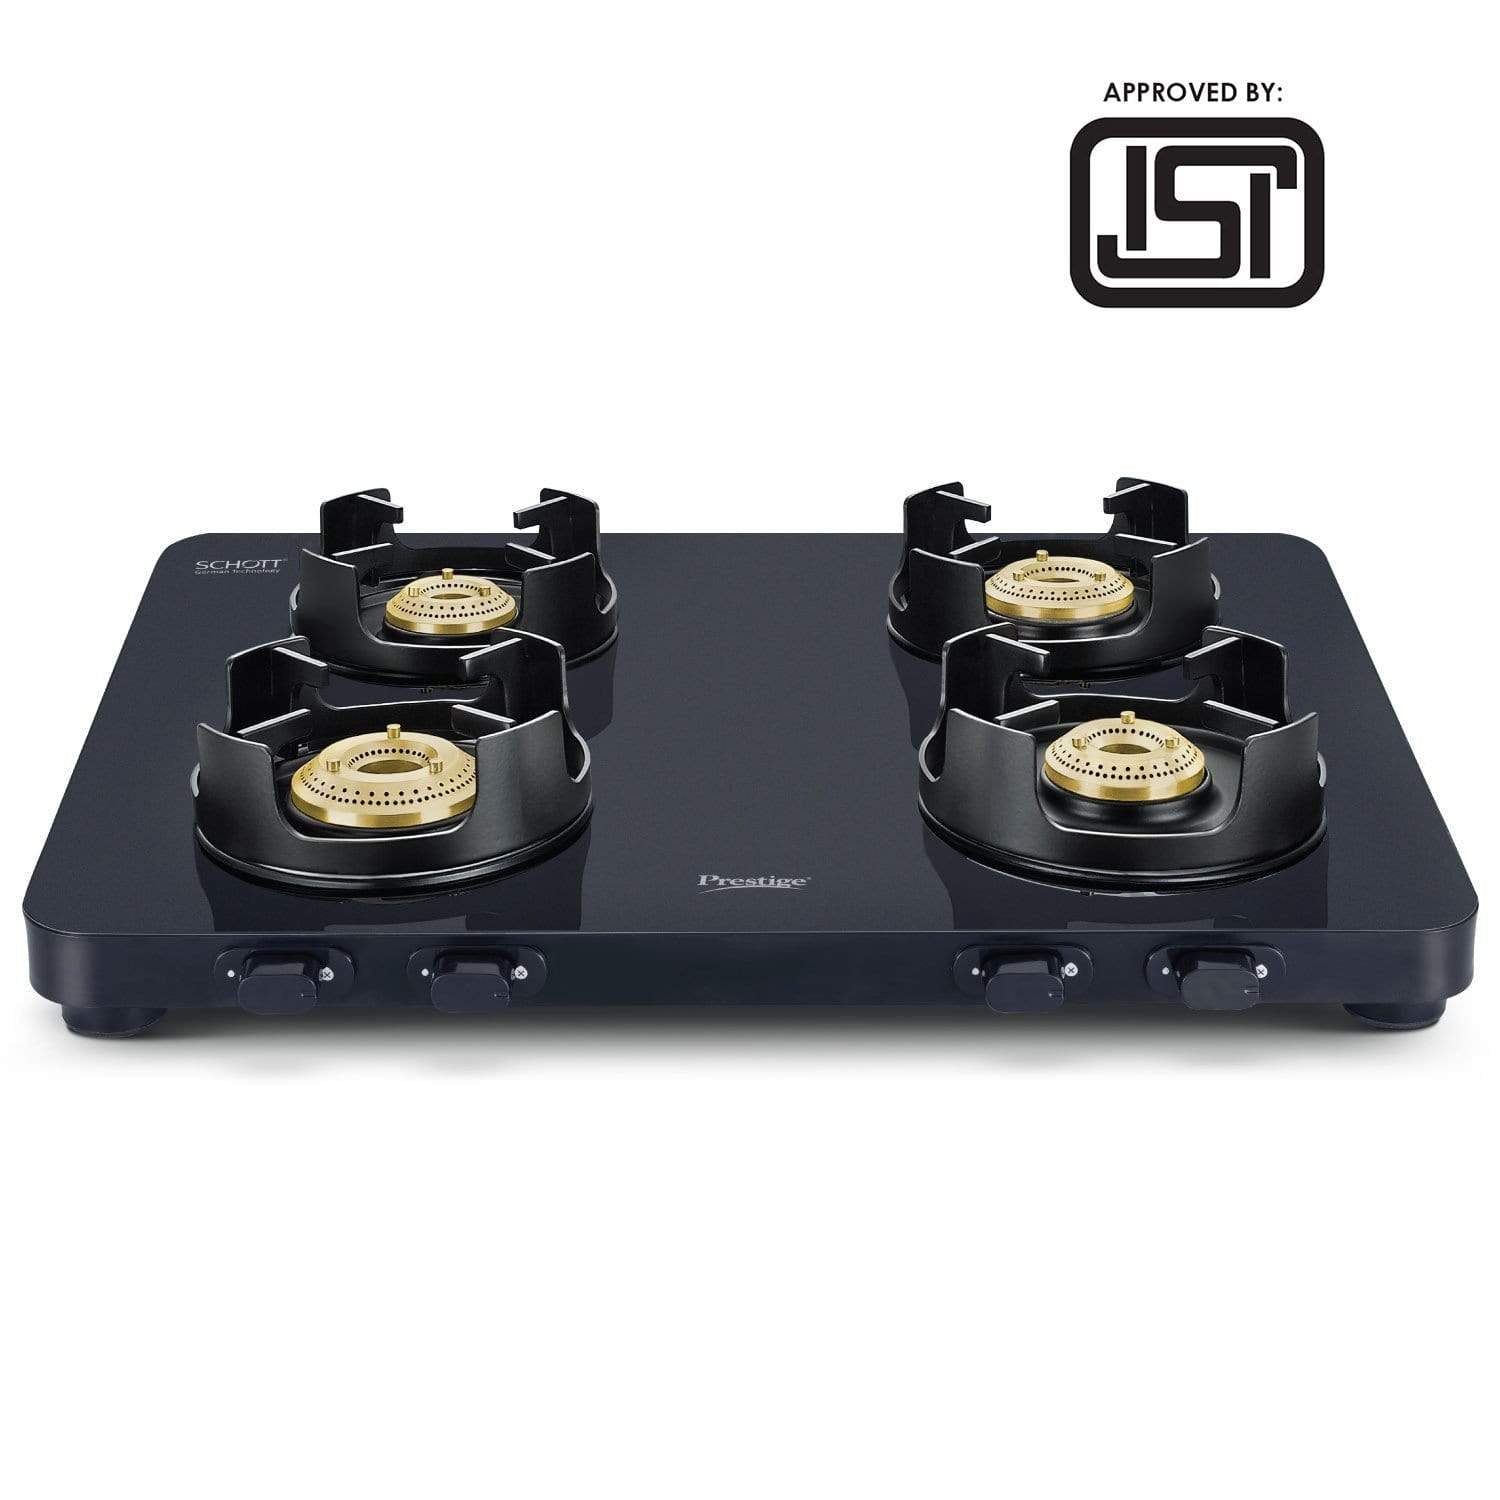 Prestige Edge 4 Burner Glass Gas Stove PEBS 04, Black(ISI Approved) with SCHOTT GLASS - KITCHEN MART